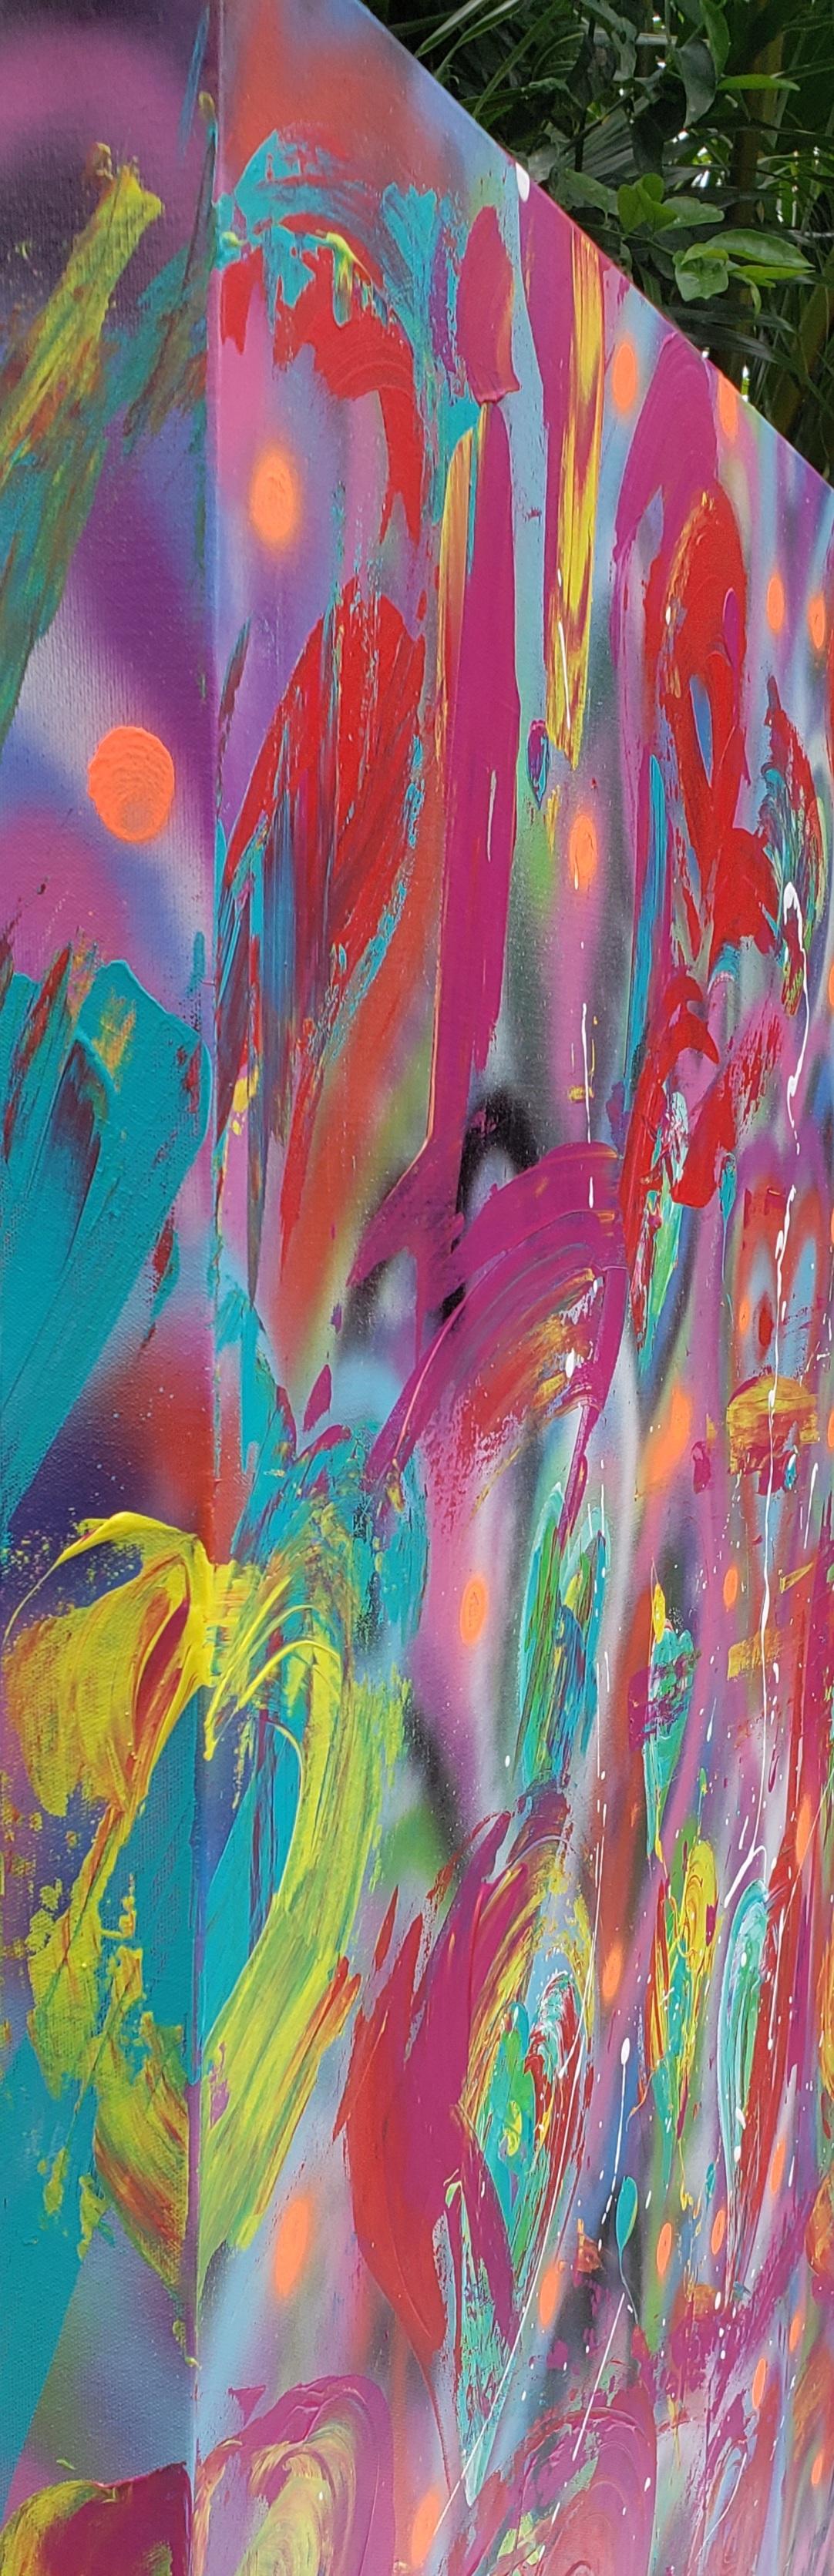 Illumination 
Nitro-acrylic, acrylic on canvas gallery wrap.
Keith Carrington’s experiences have led him to express his talents through the fluid & exacting mediums of watercolor and ink.  He has honed his skills, clarified his vision,